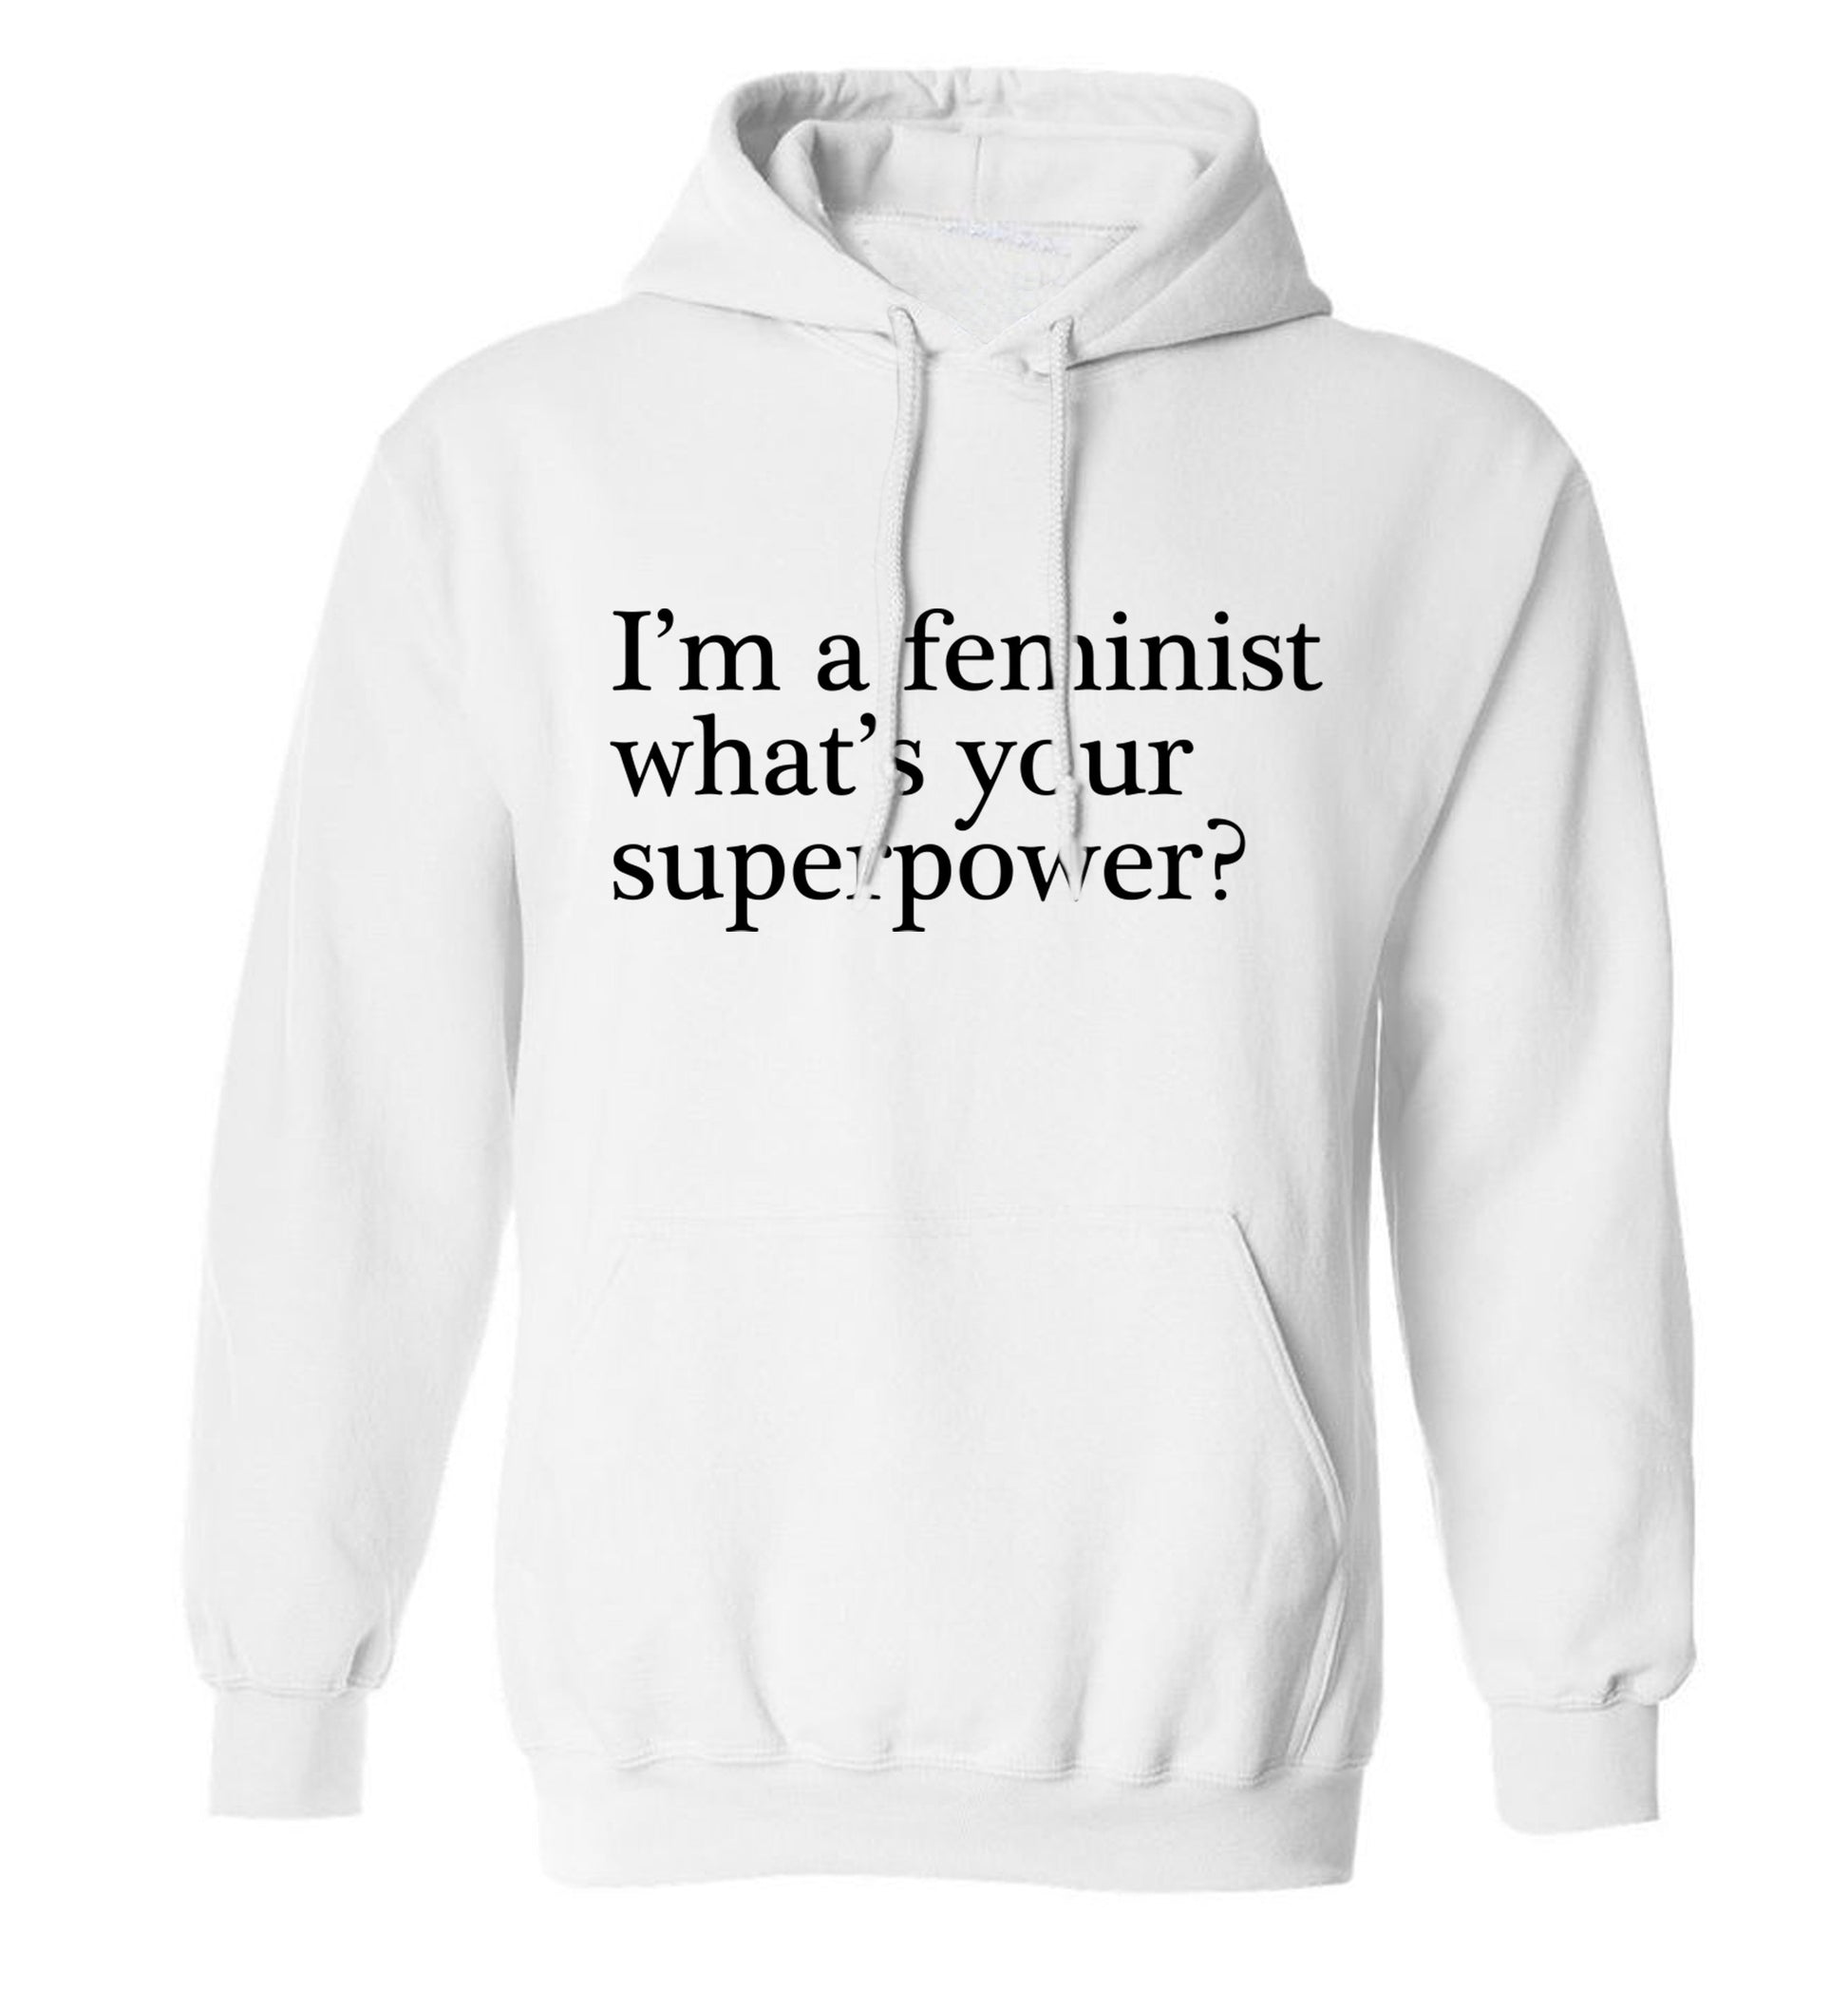 I'm a feminist what's your superpower? adults unisex white hoodie 2XL